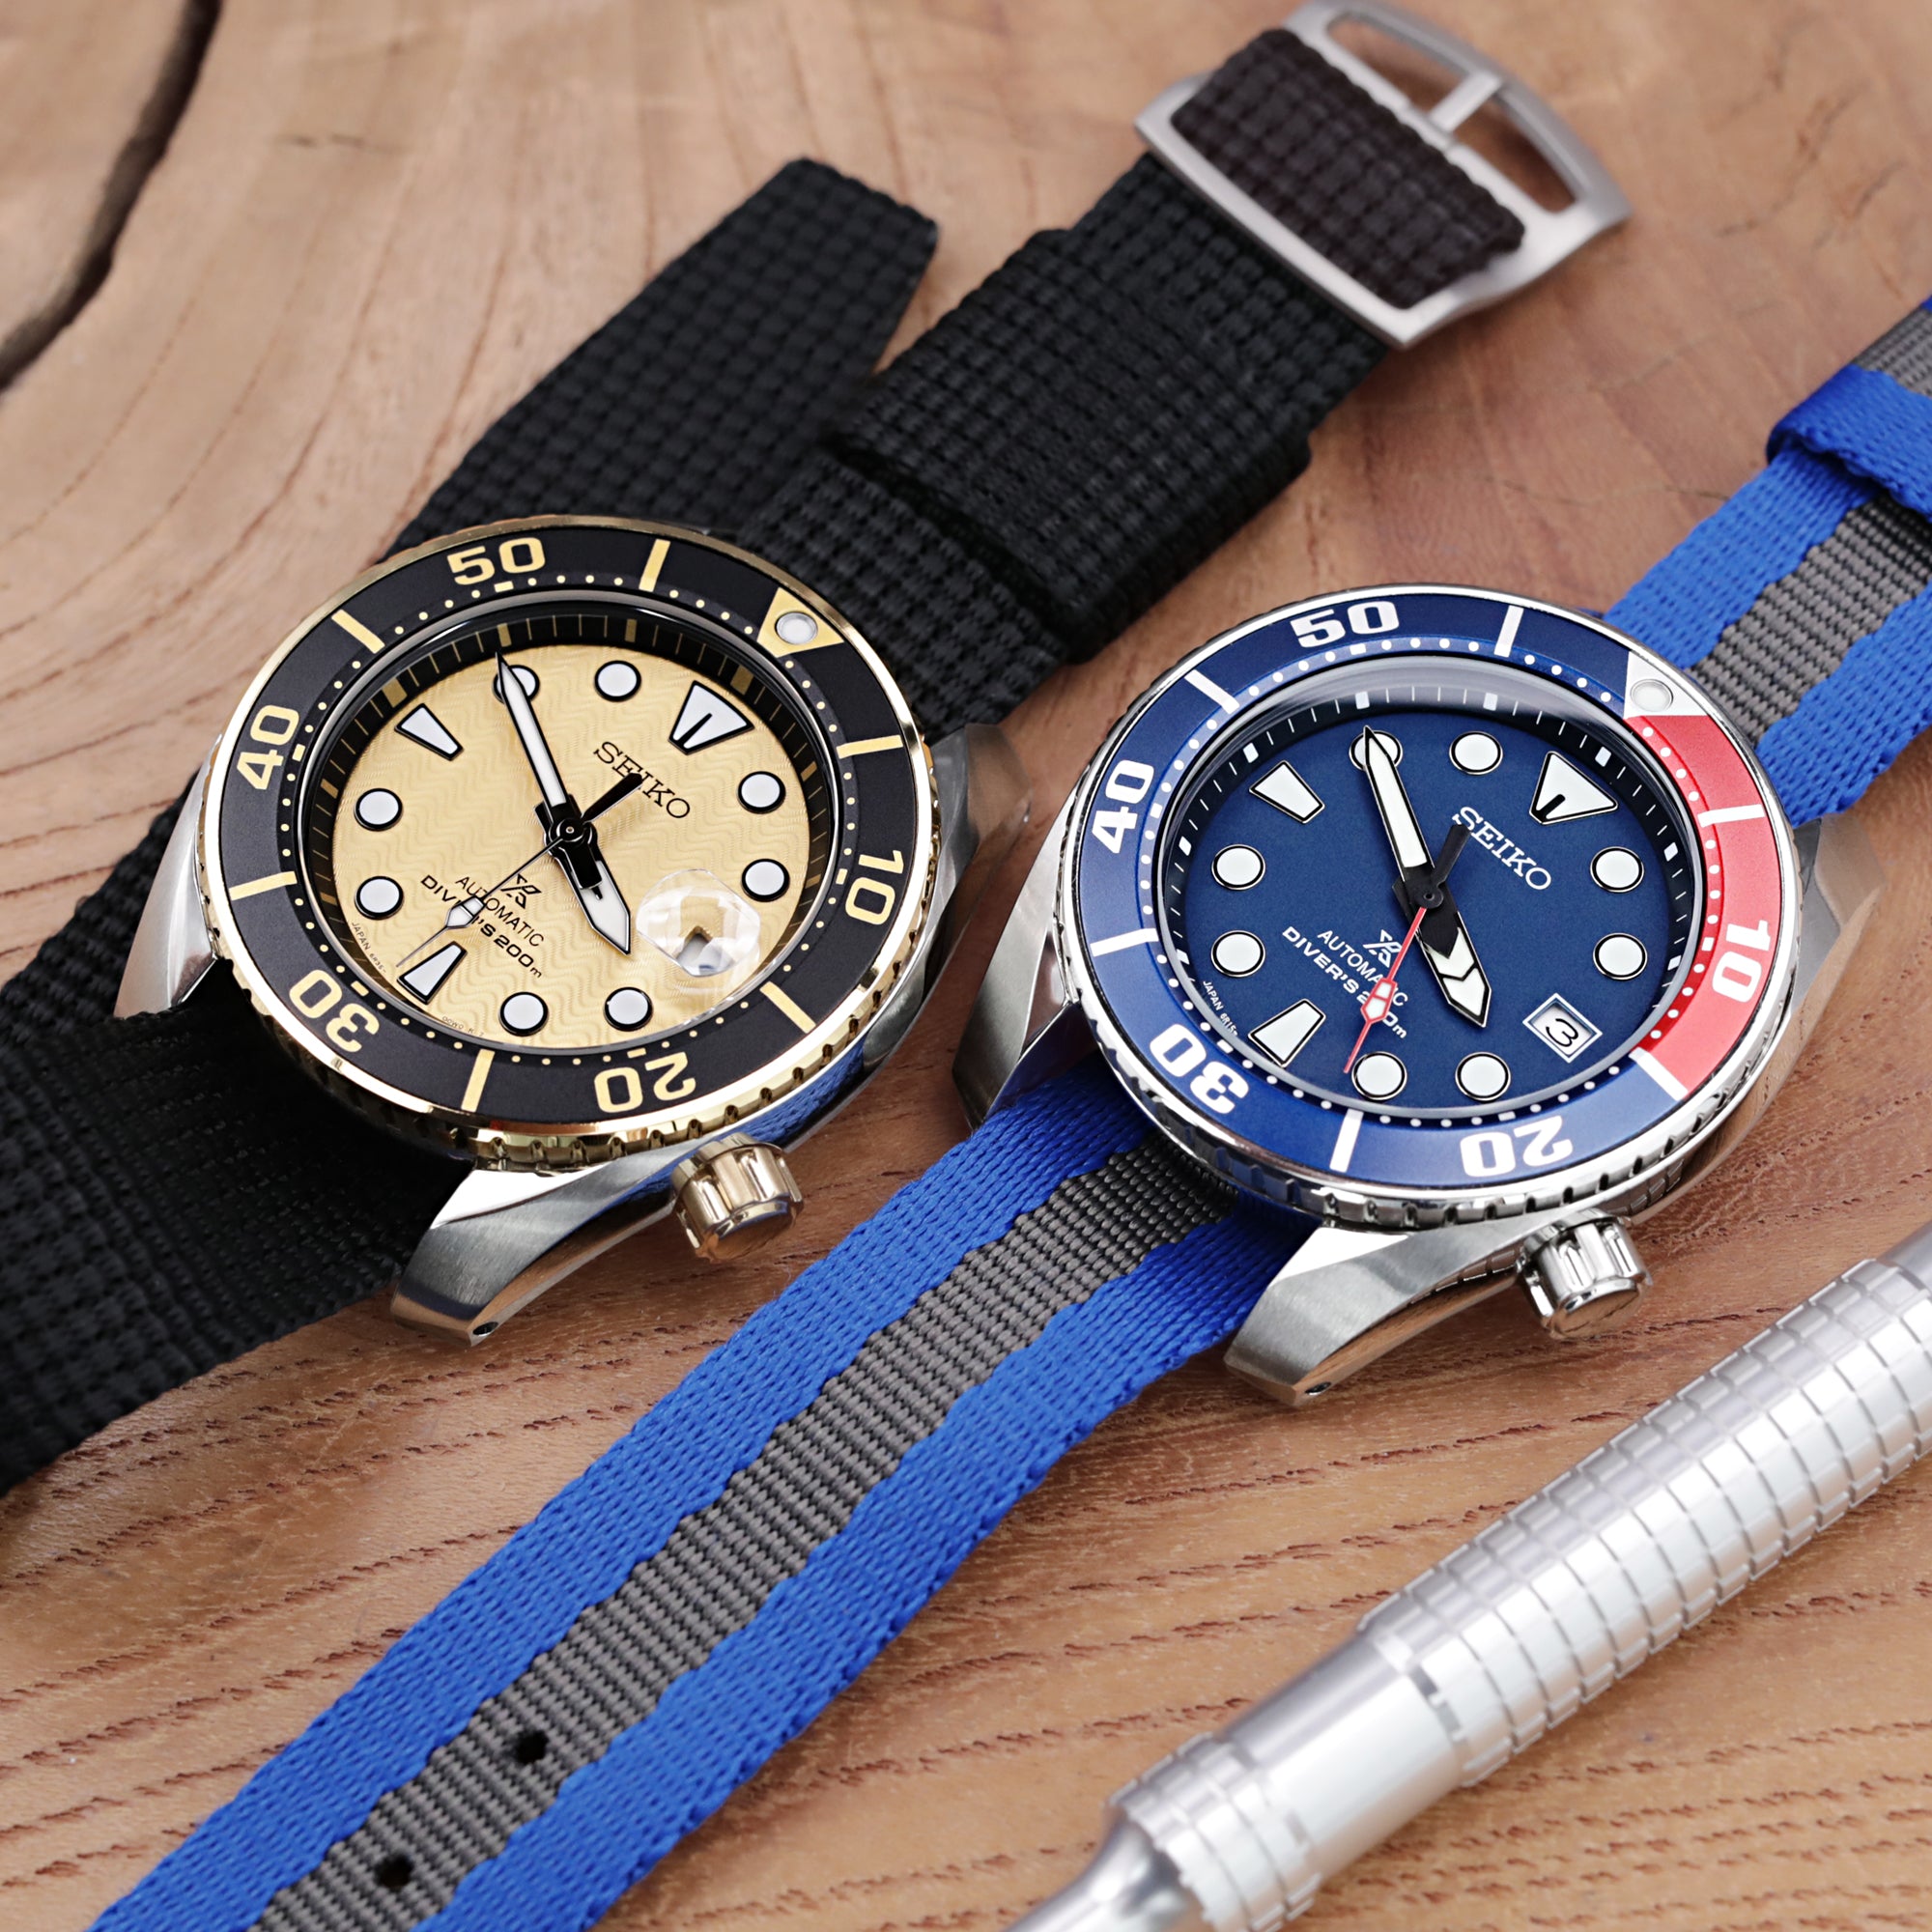 Nato Strap : The RAF N7 Collection